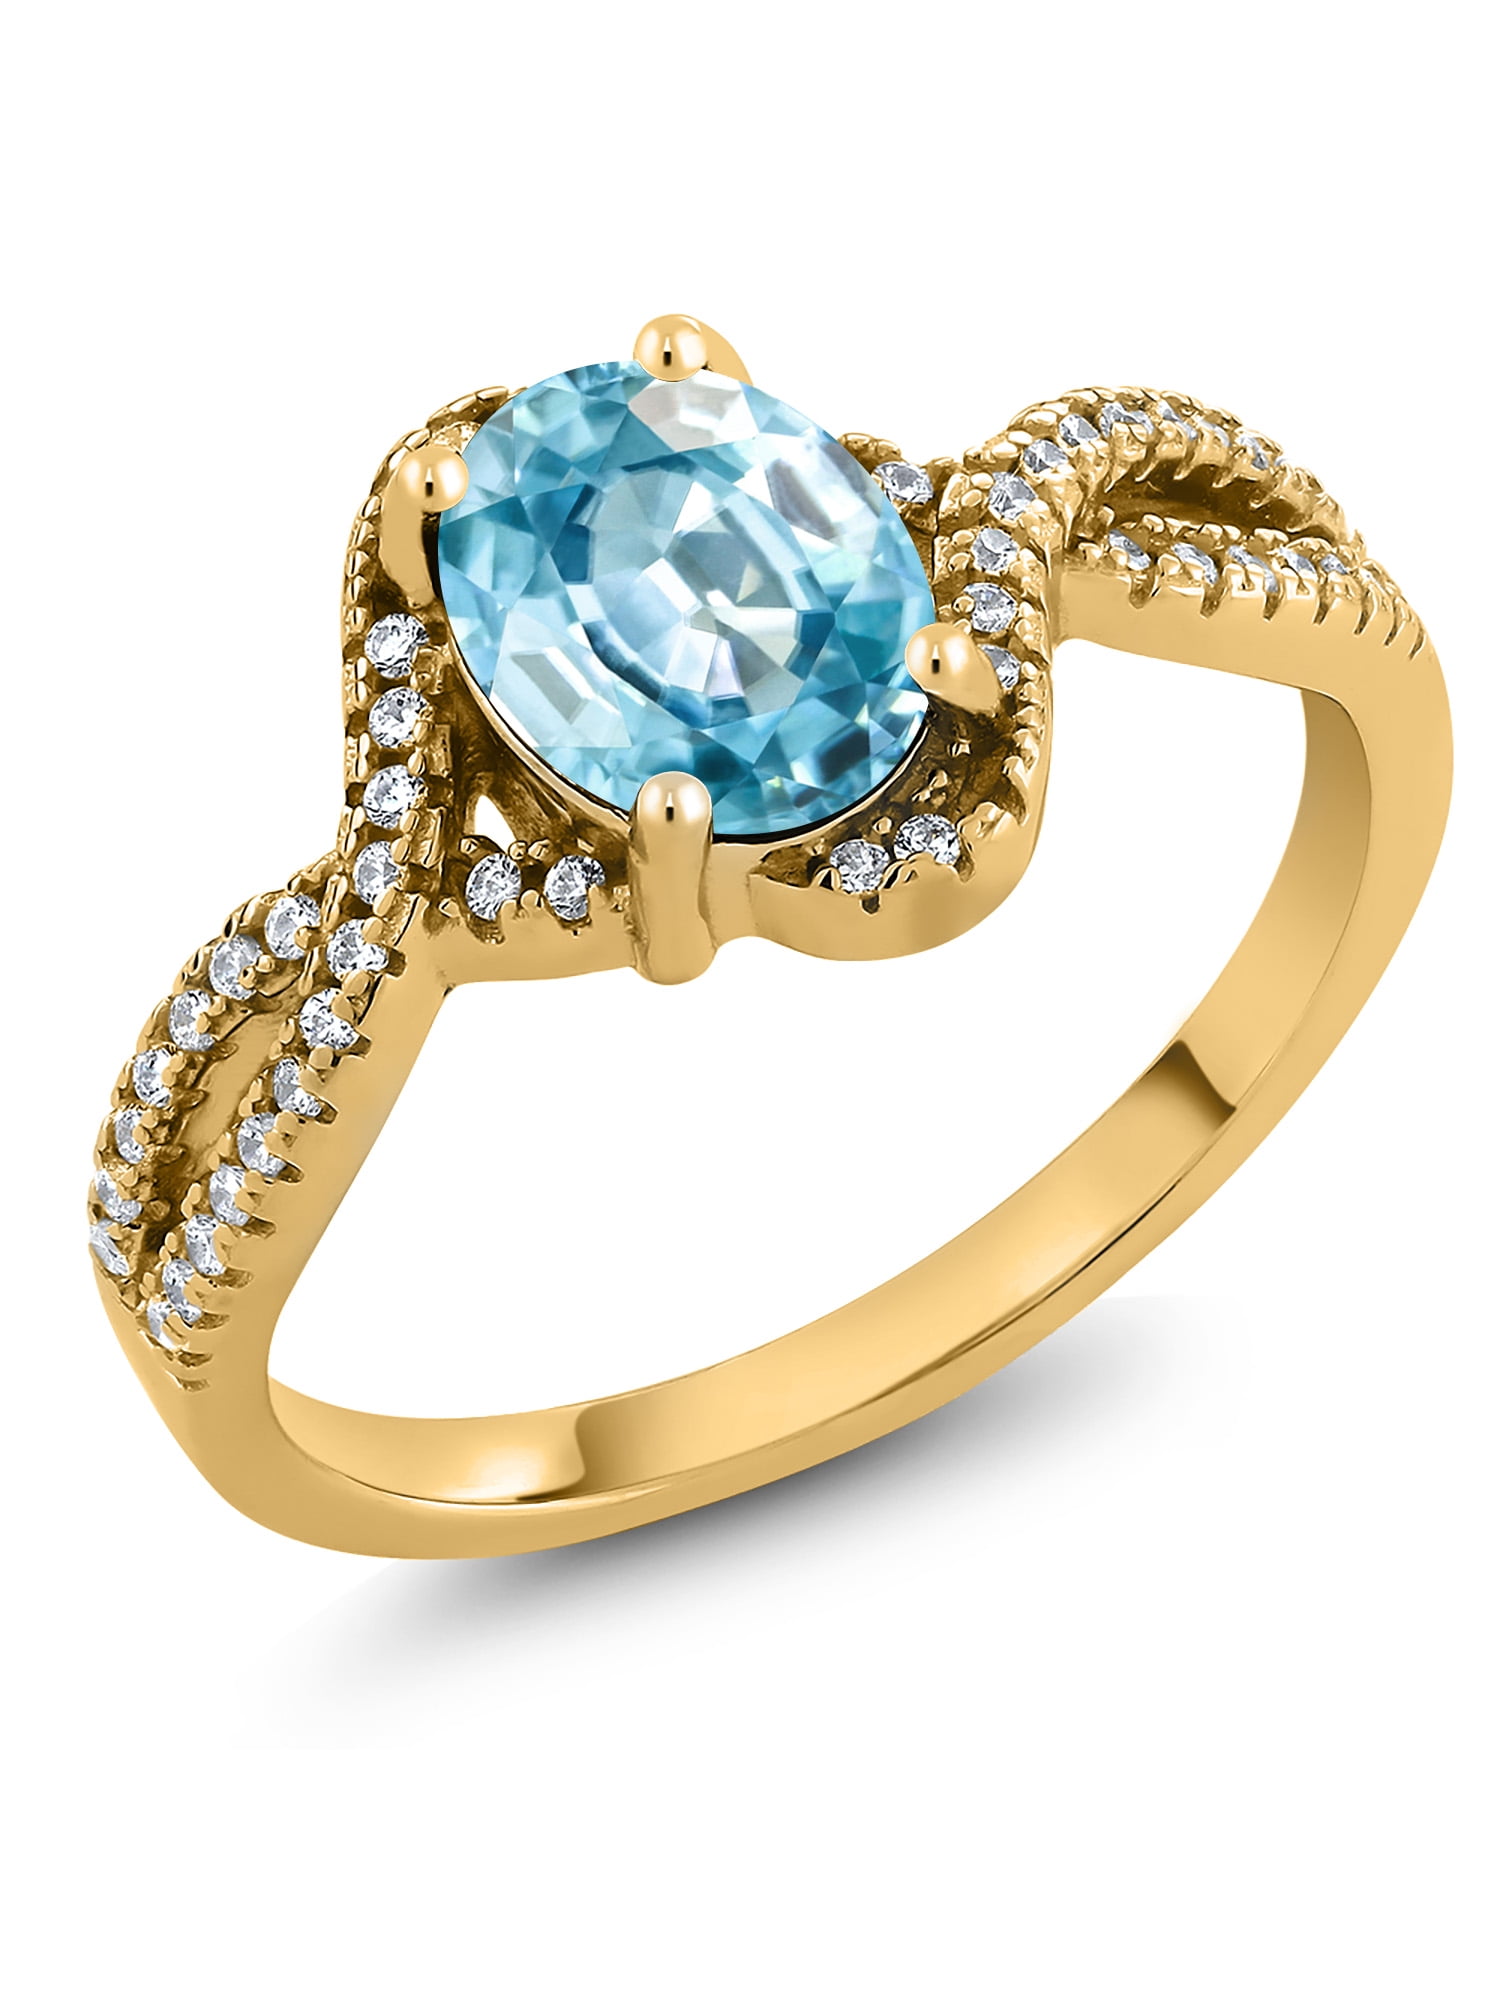 Gem Stone King 1.20 Ct Oval Blue Zircon 18K Yellow Gold Plated Silver Ring 